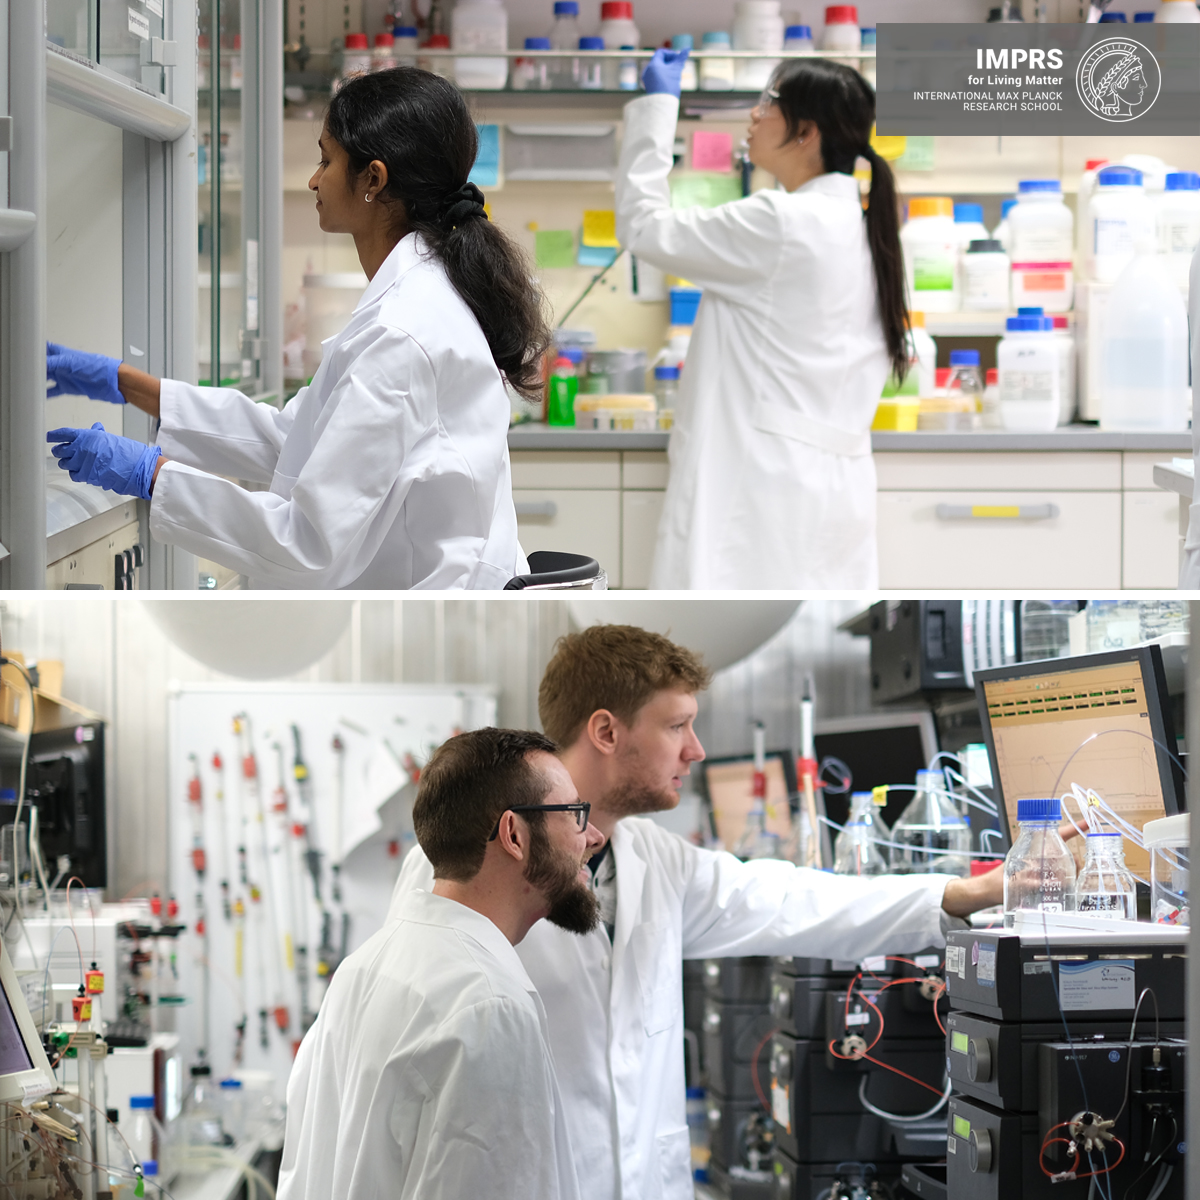 Are you looking for a PhD in #biochemistry, #cellbiology, #molecularbiology, #syntheticbiology and #structuralbiology? @IMPRS_LM you can apply for fully funded #PhD positions and you will have access to state-of-the-art research facilities!